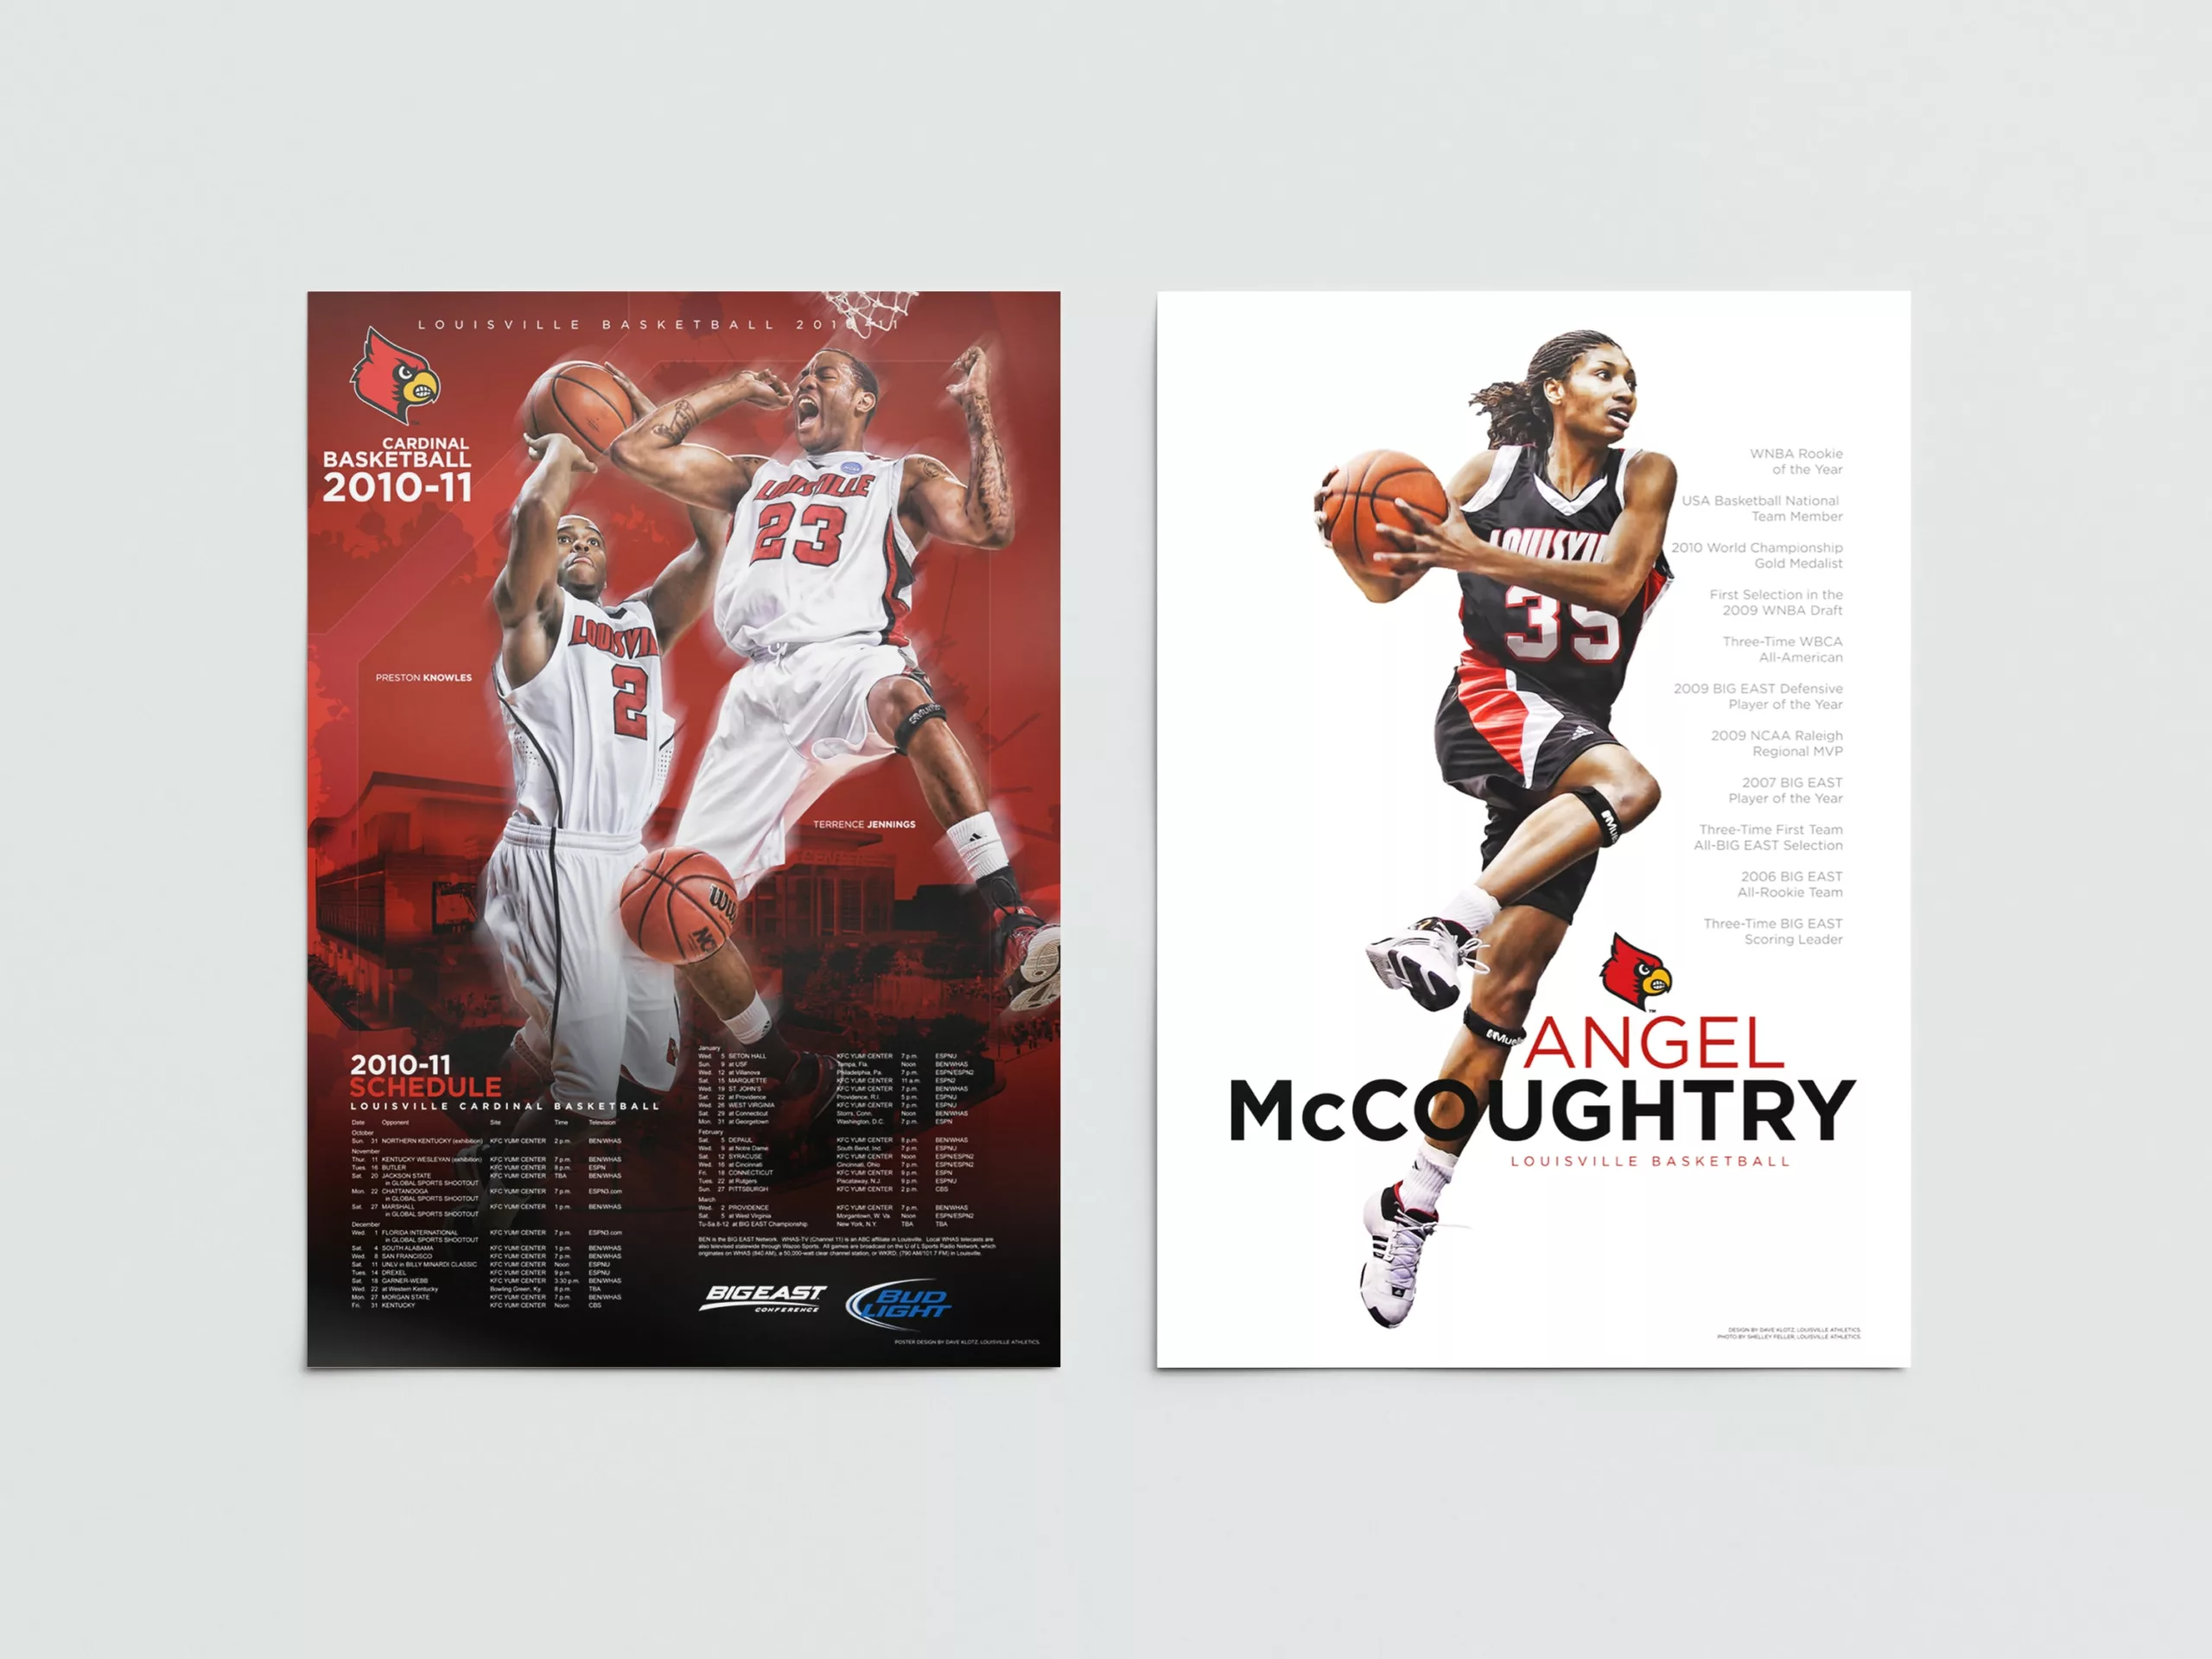 Louisville Basketball posters